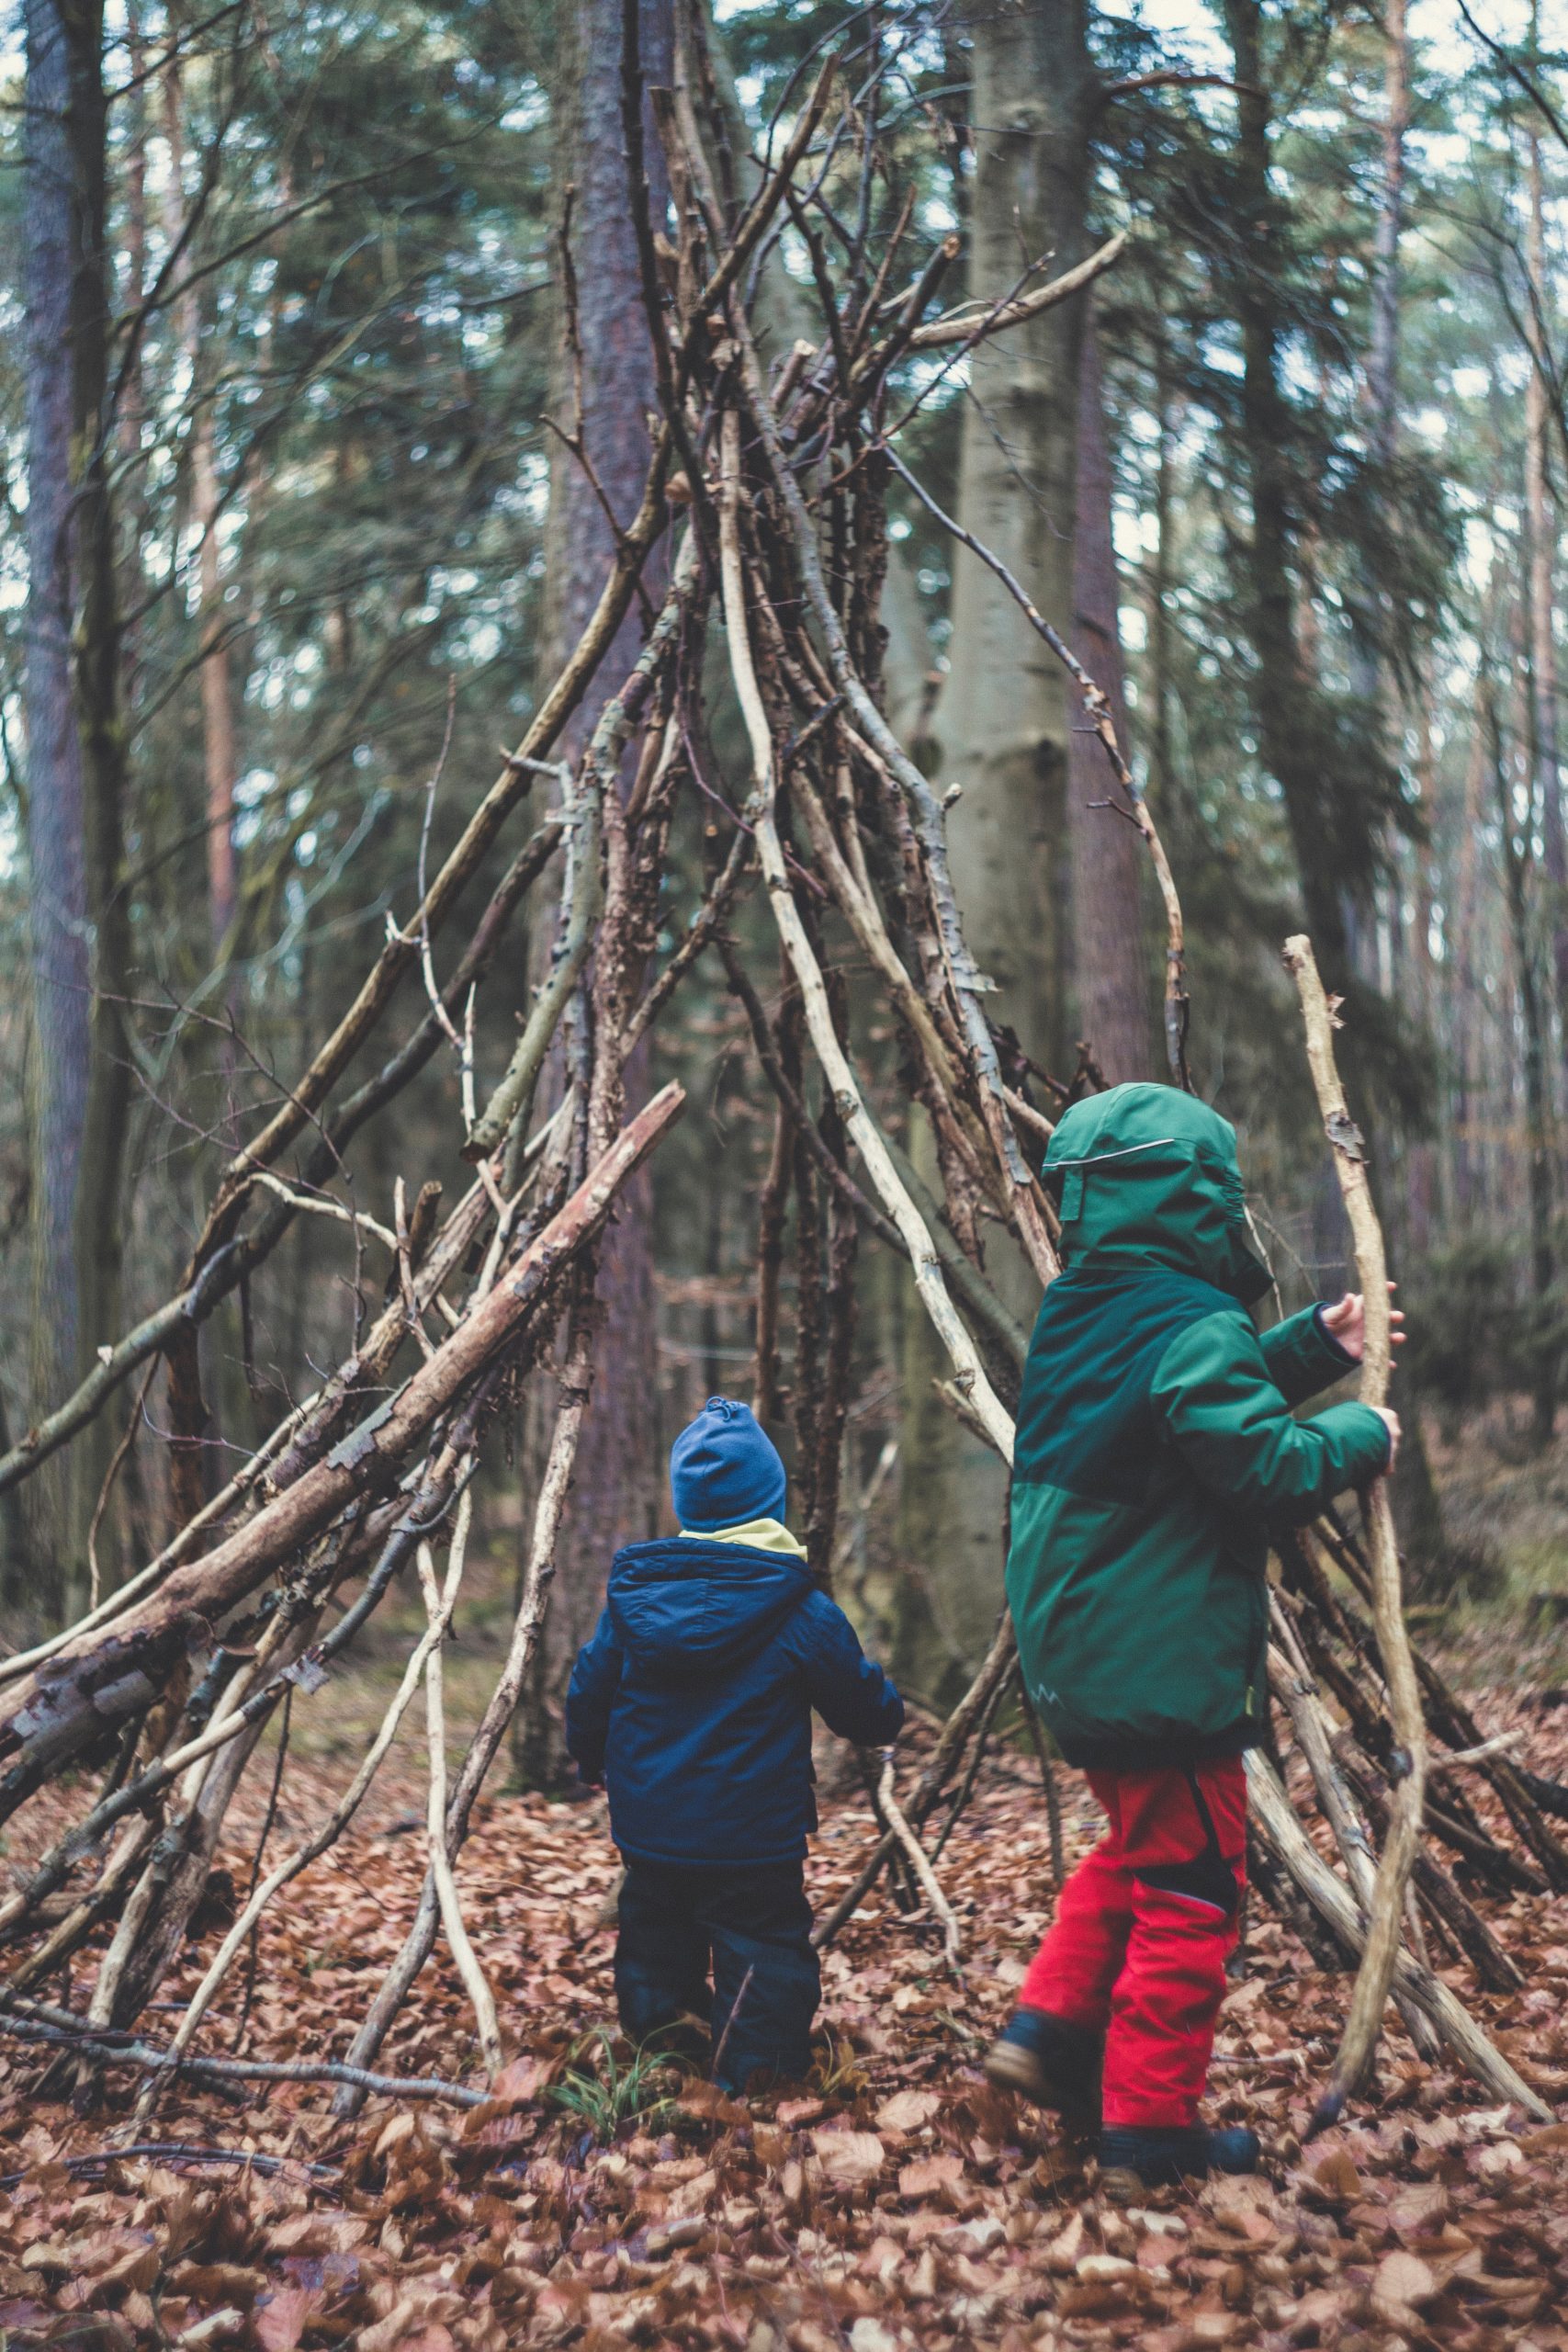 Children play in the forest and build a tent with sticks